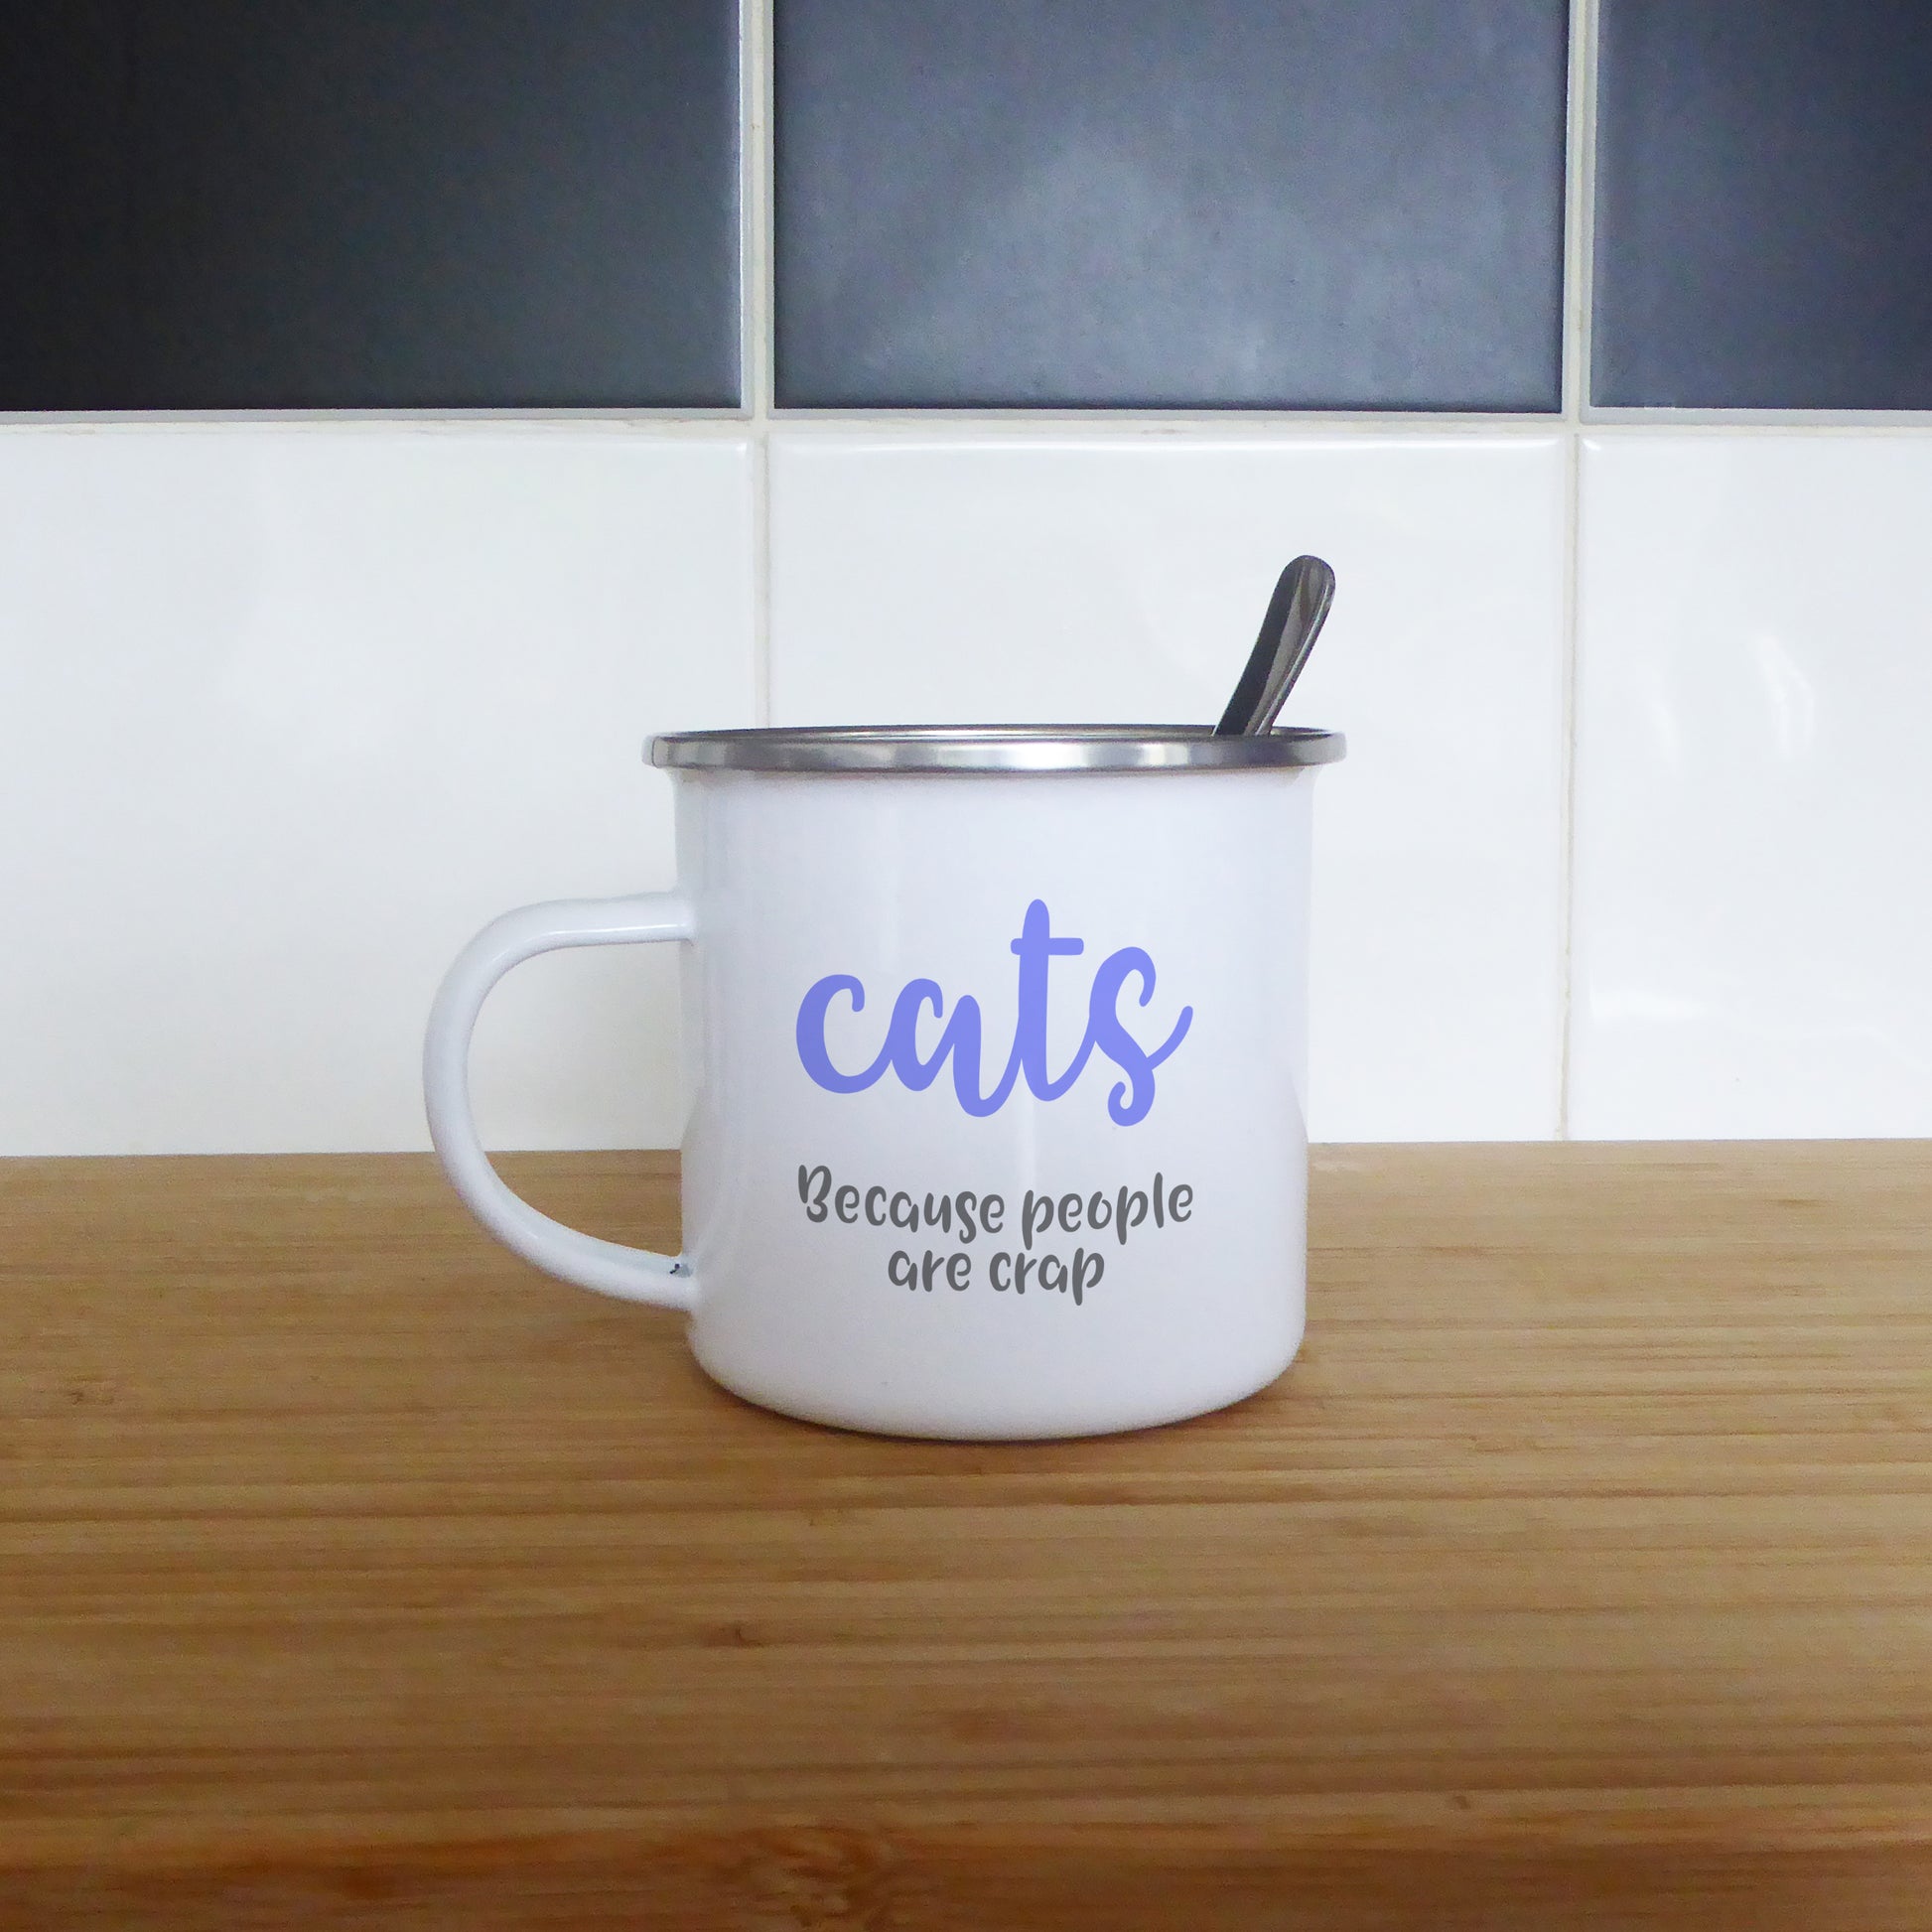 Cats because people are crap | Enamel mug - Adnil Creations